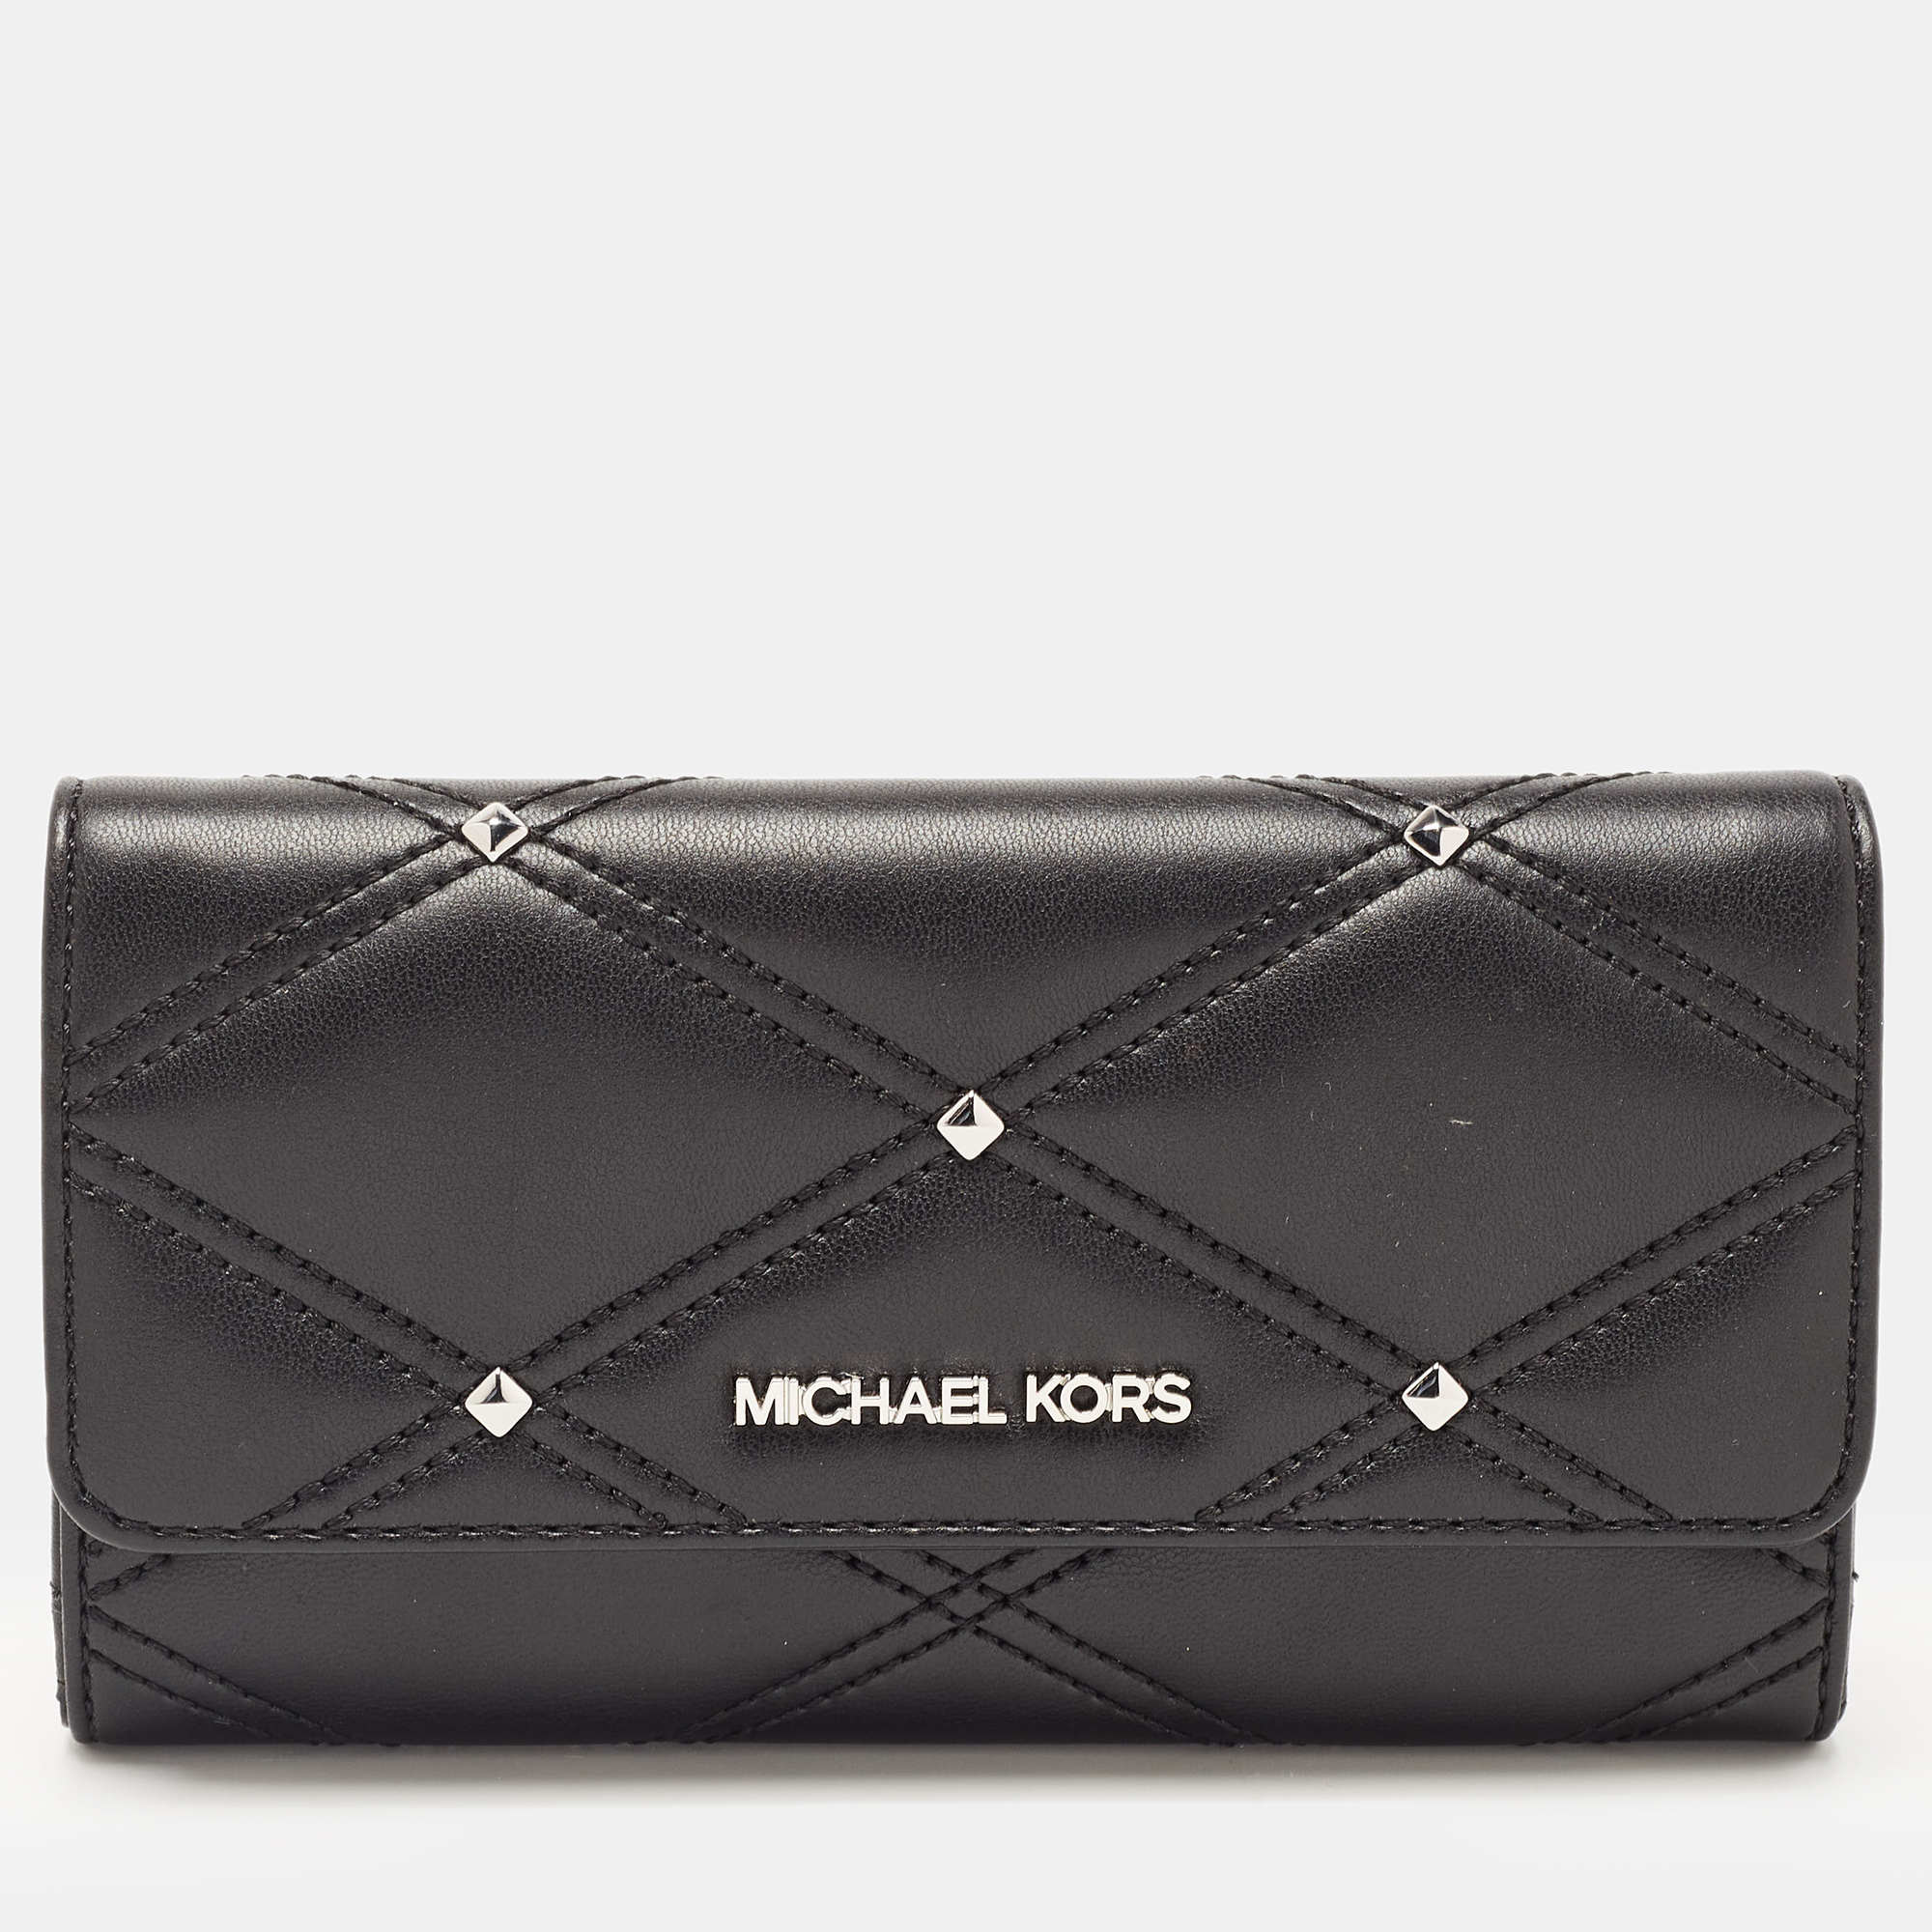 Michael Kors Black Quilted Leather Jet Set Travel Trifold Continental  Wallet